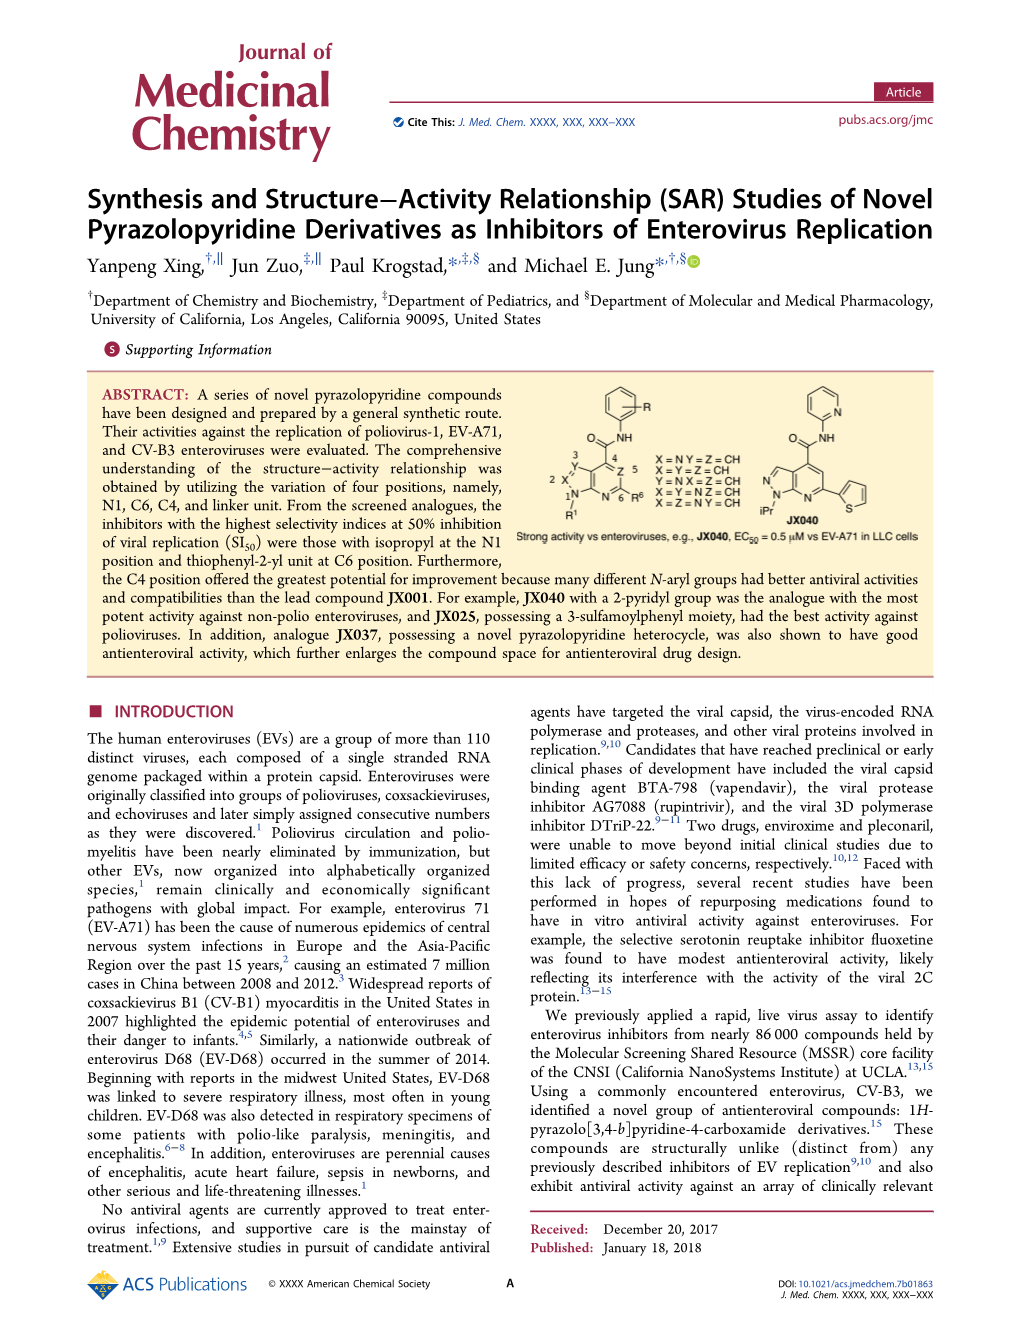 Synthesis and Structure–Activity Relationship (SAR) Studies of Novel Pyrazolopyridine Derivatives As Inhibitors of Enterovirus